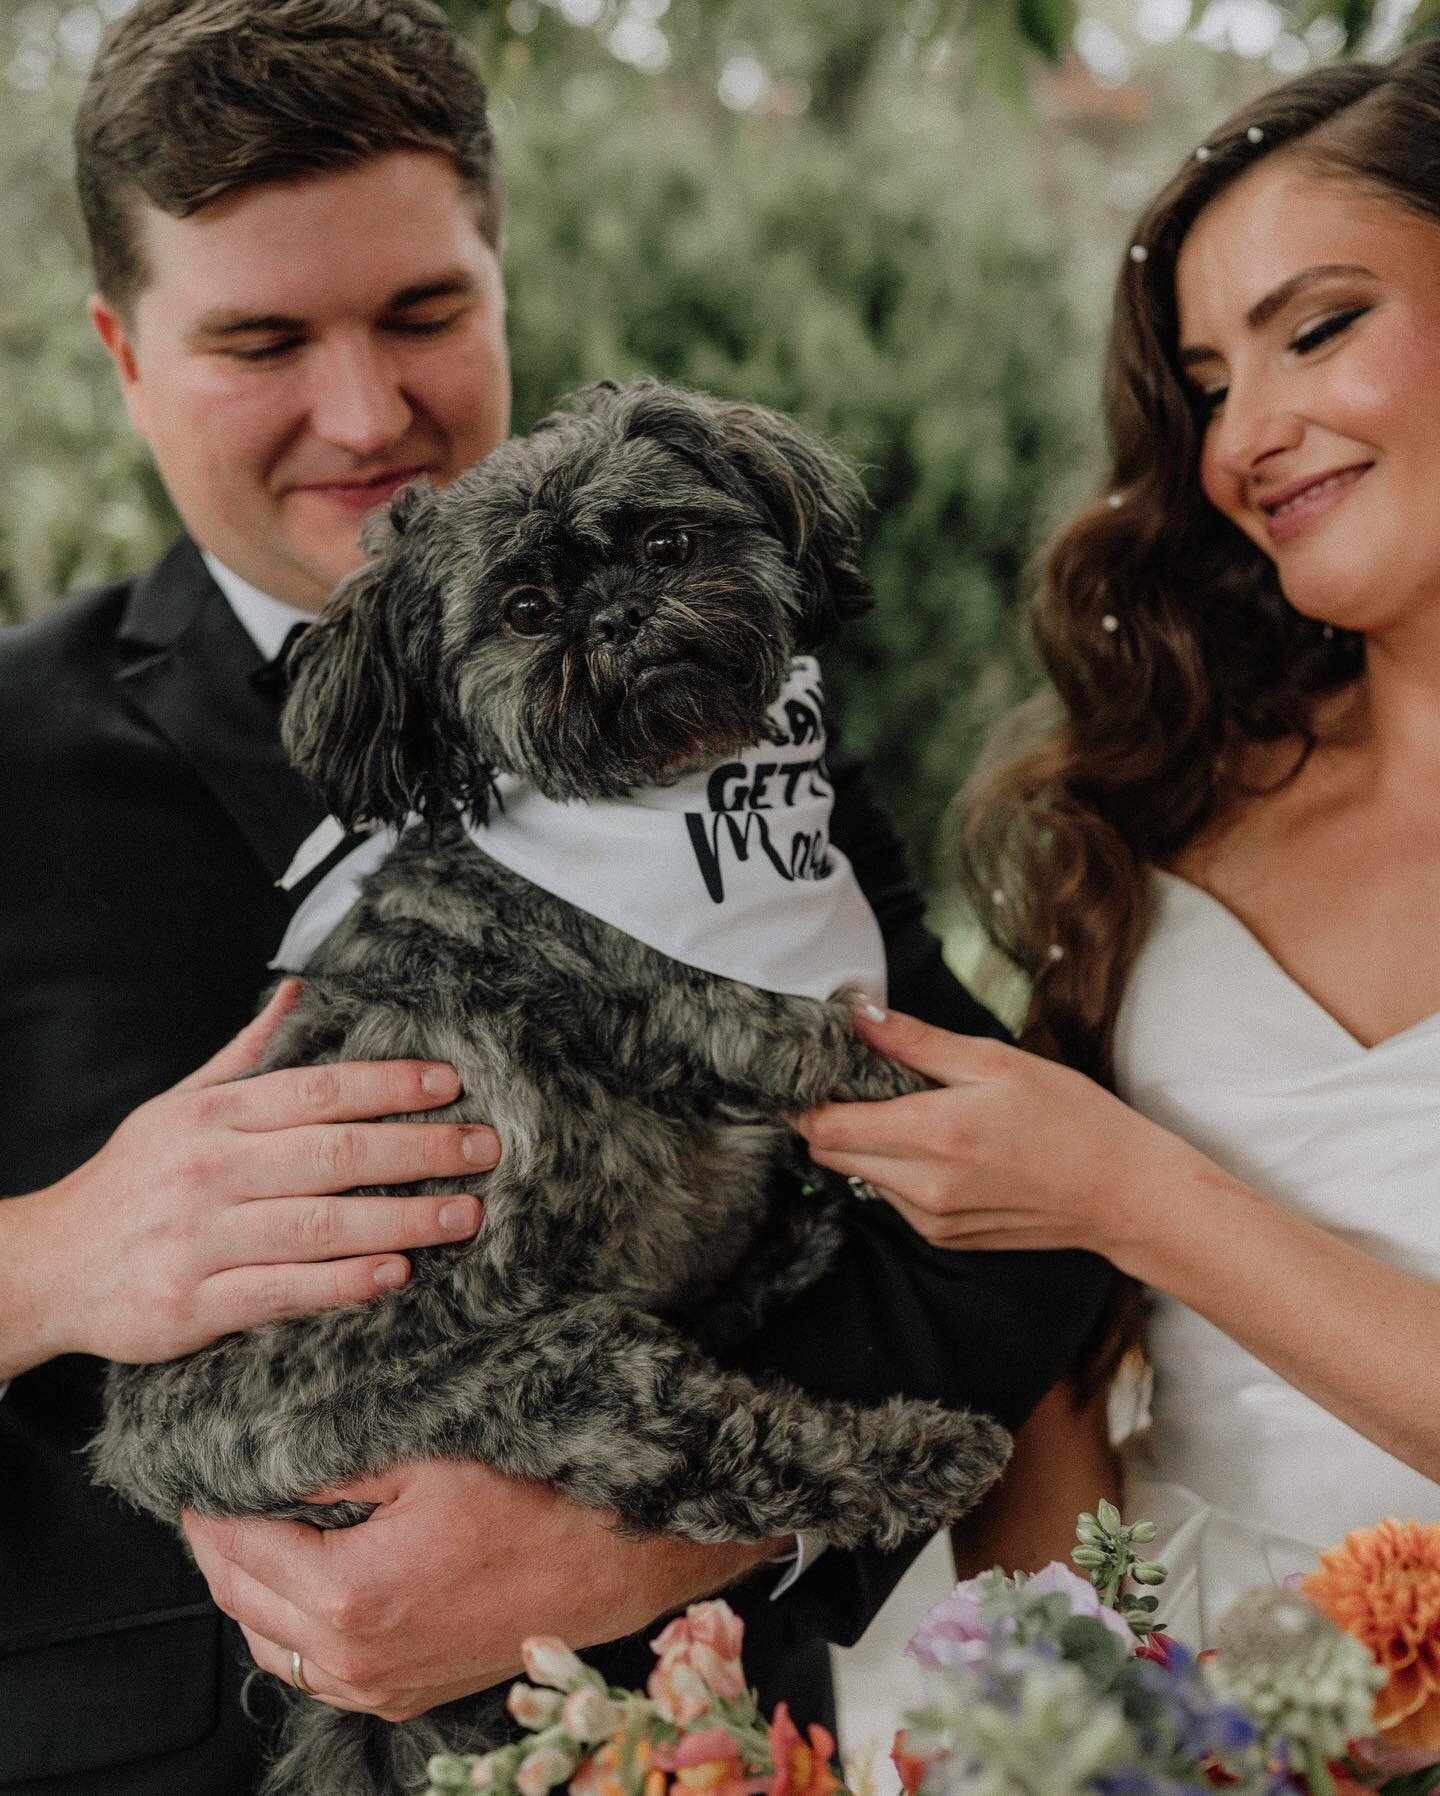 I 🤍 Ted 

. ݁₊ ⊹ . ݁

A day this important should include 𝘢𝘭𝘭 your loves. If you&rsquo;re going to have a signature cocktail at your reception, consider naming it after your beloved fur baby! 

Photography | @haleyocallaghan 
Couple | @sarahbish7